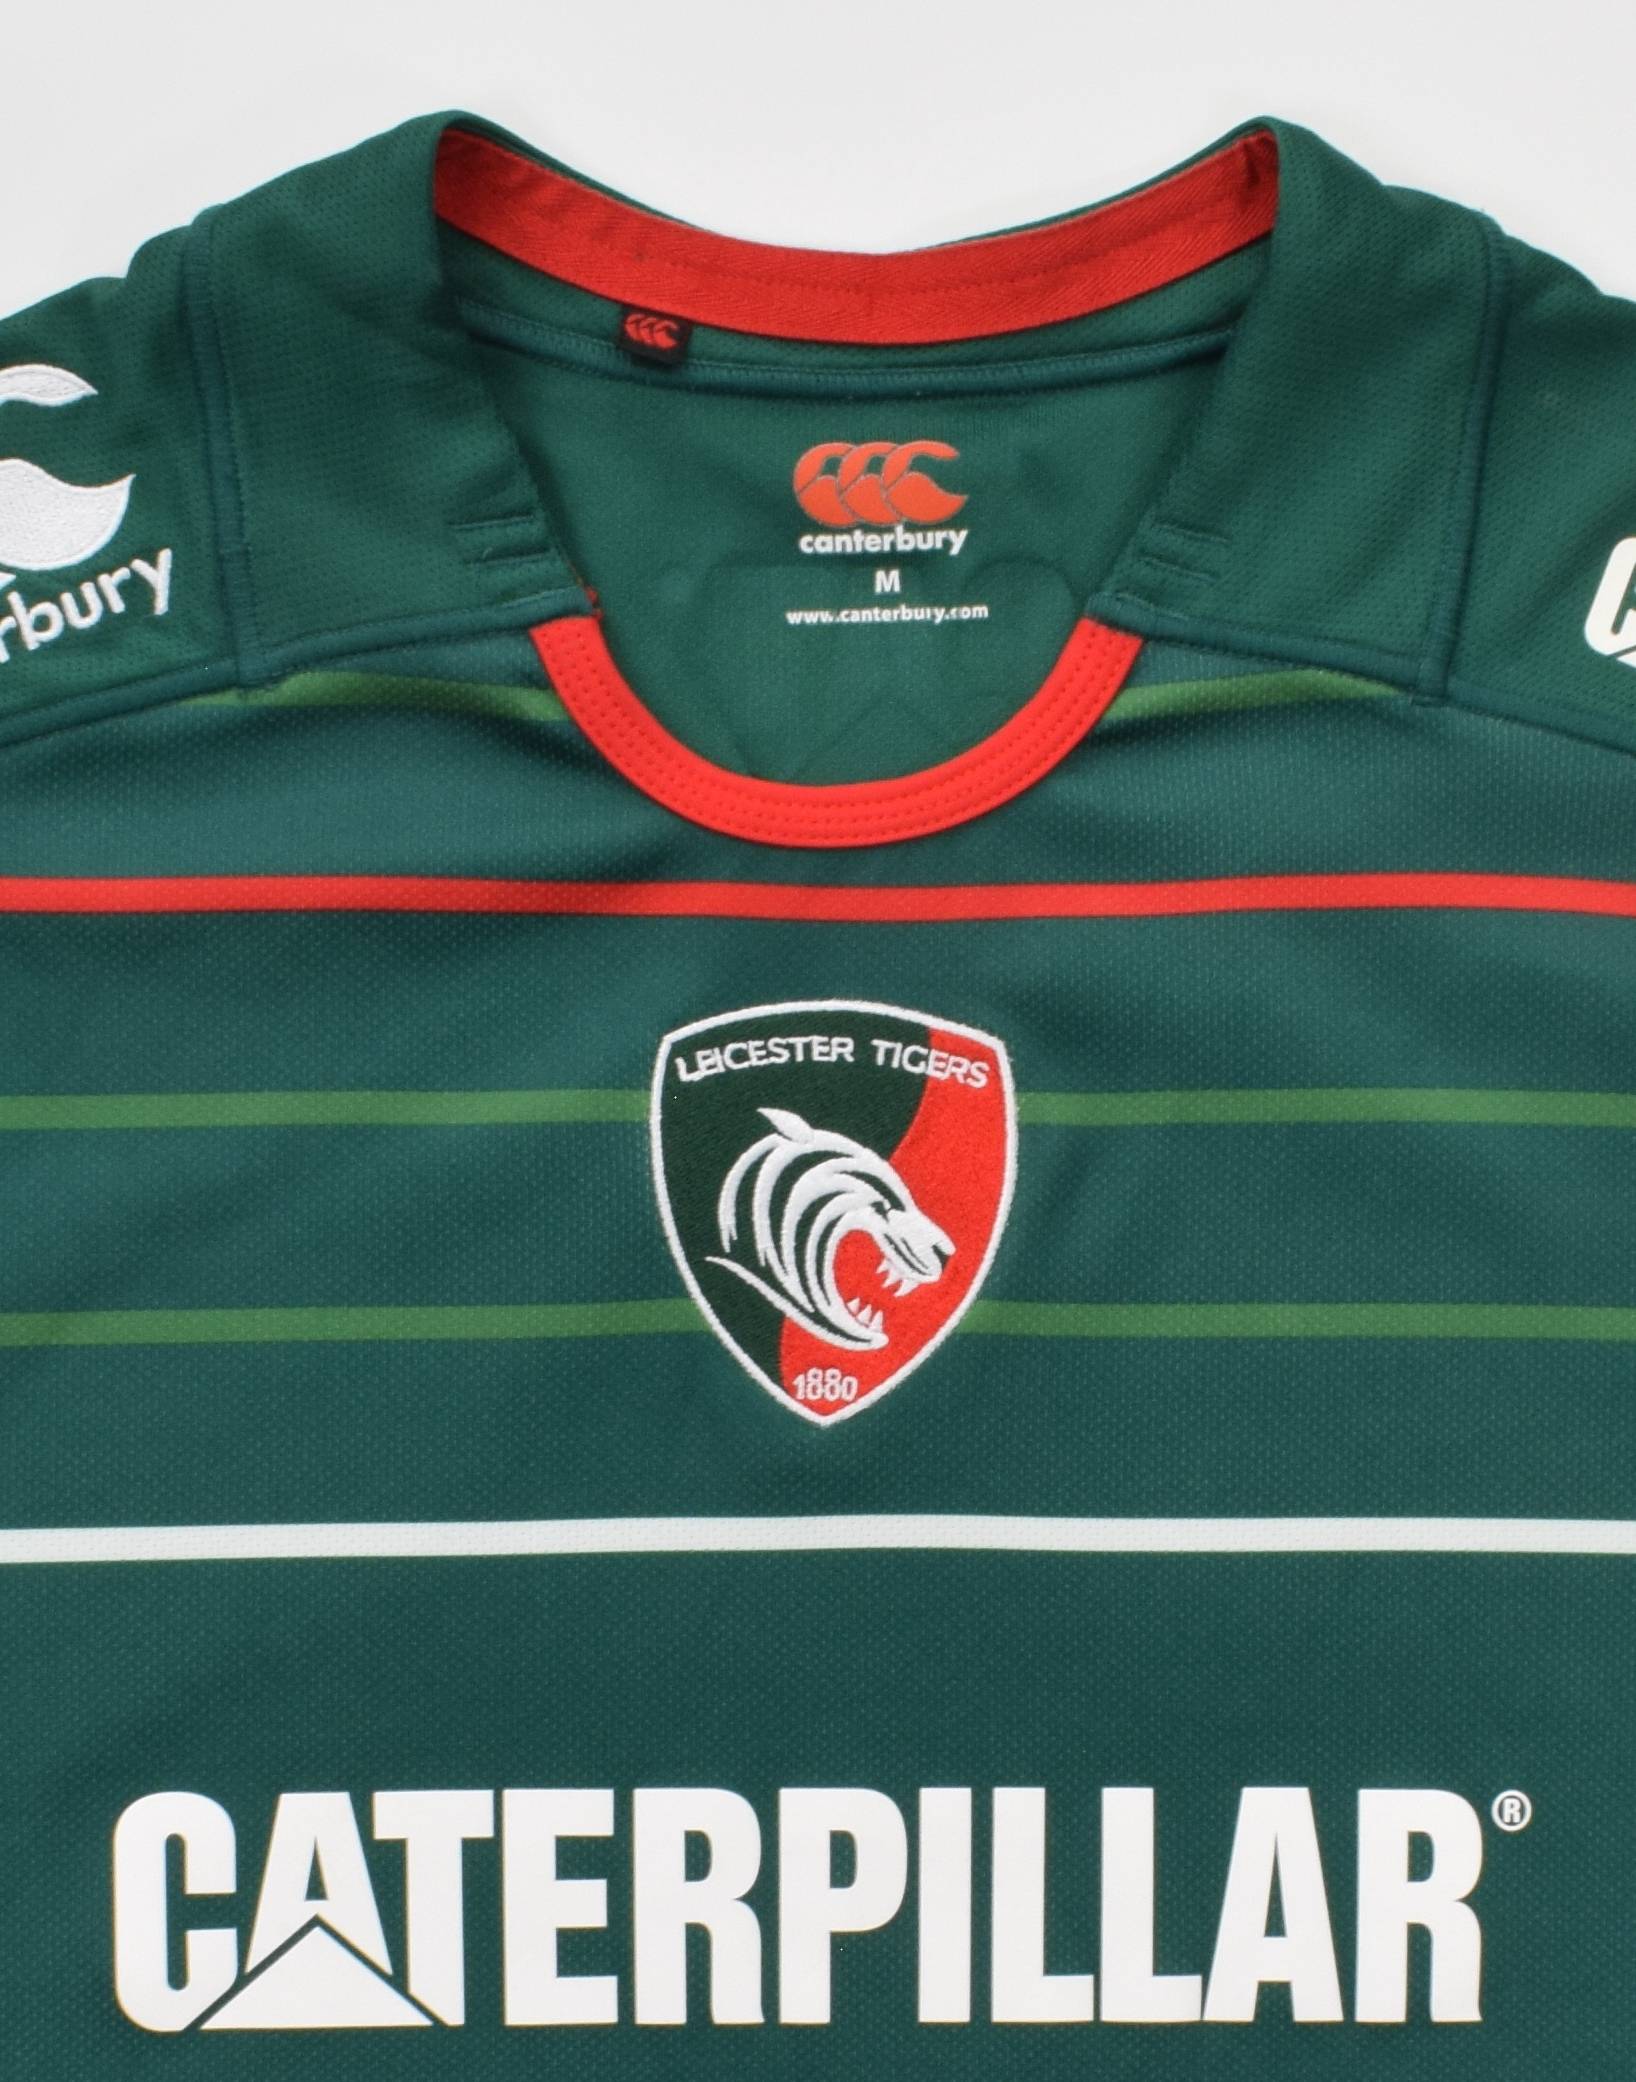 LEICESTER TIGERS RUGBY CANTERBURY SHIRT M Rugby \ Rugby Union ...